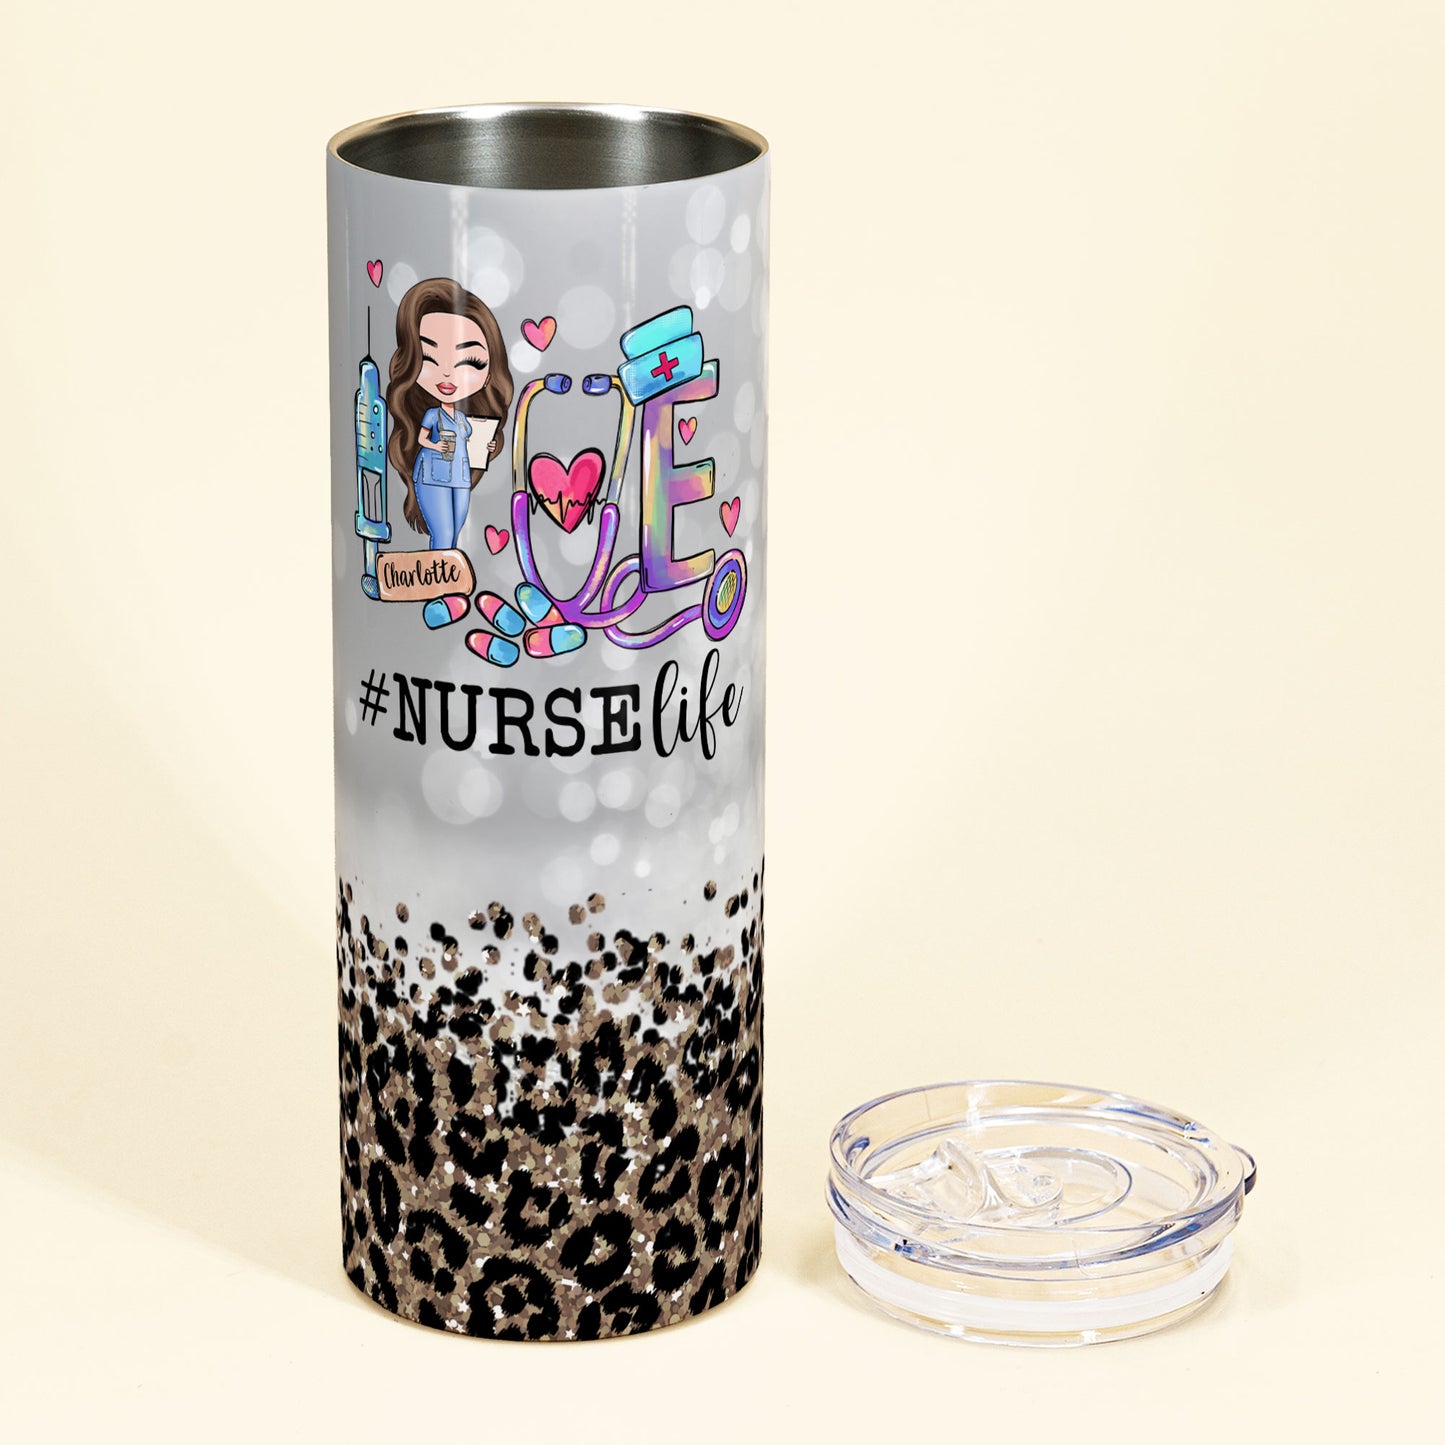 Nurse Nutrition Facts  - Personalized Skinny Tumbler - Gift For Doctor & Nurse